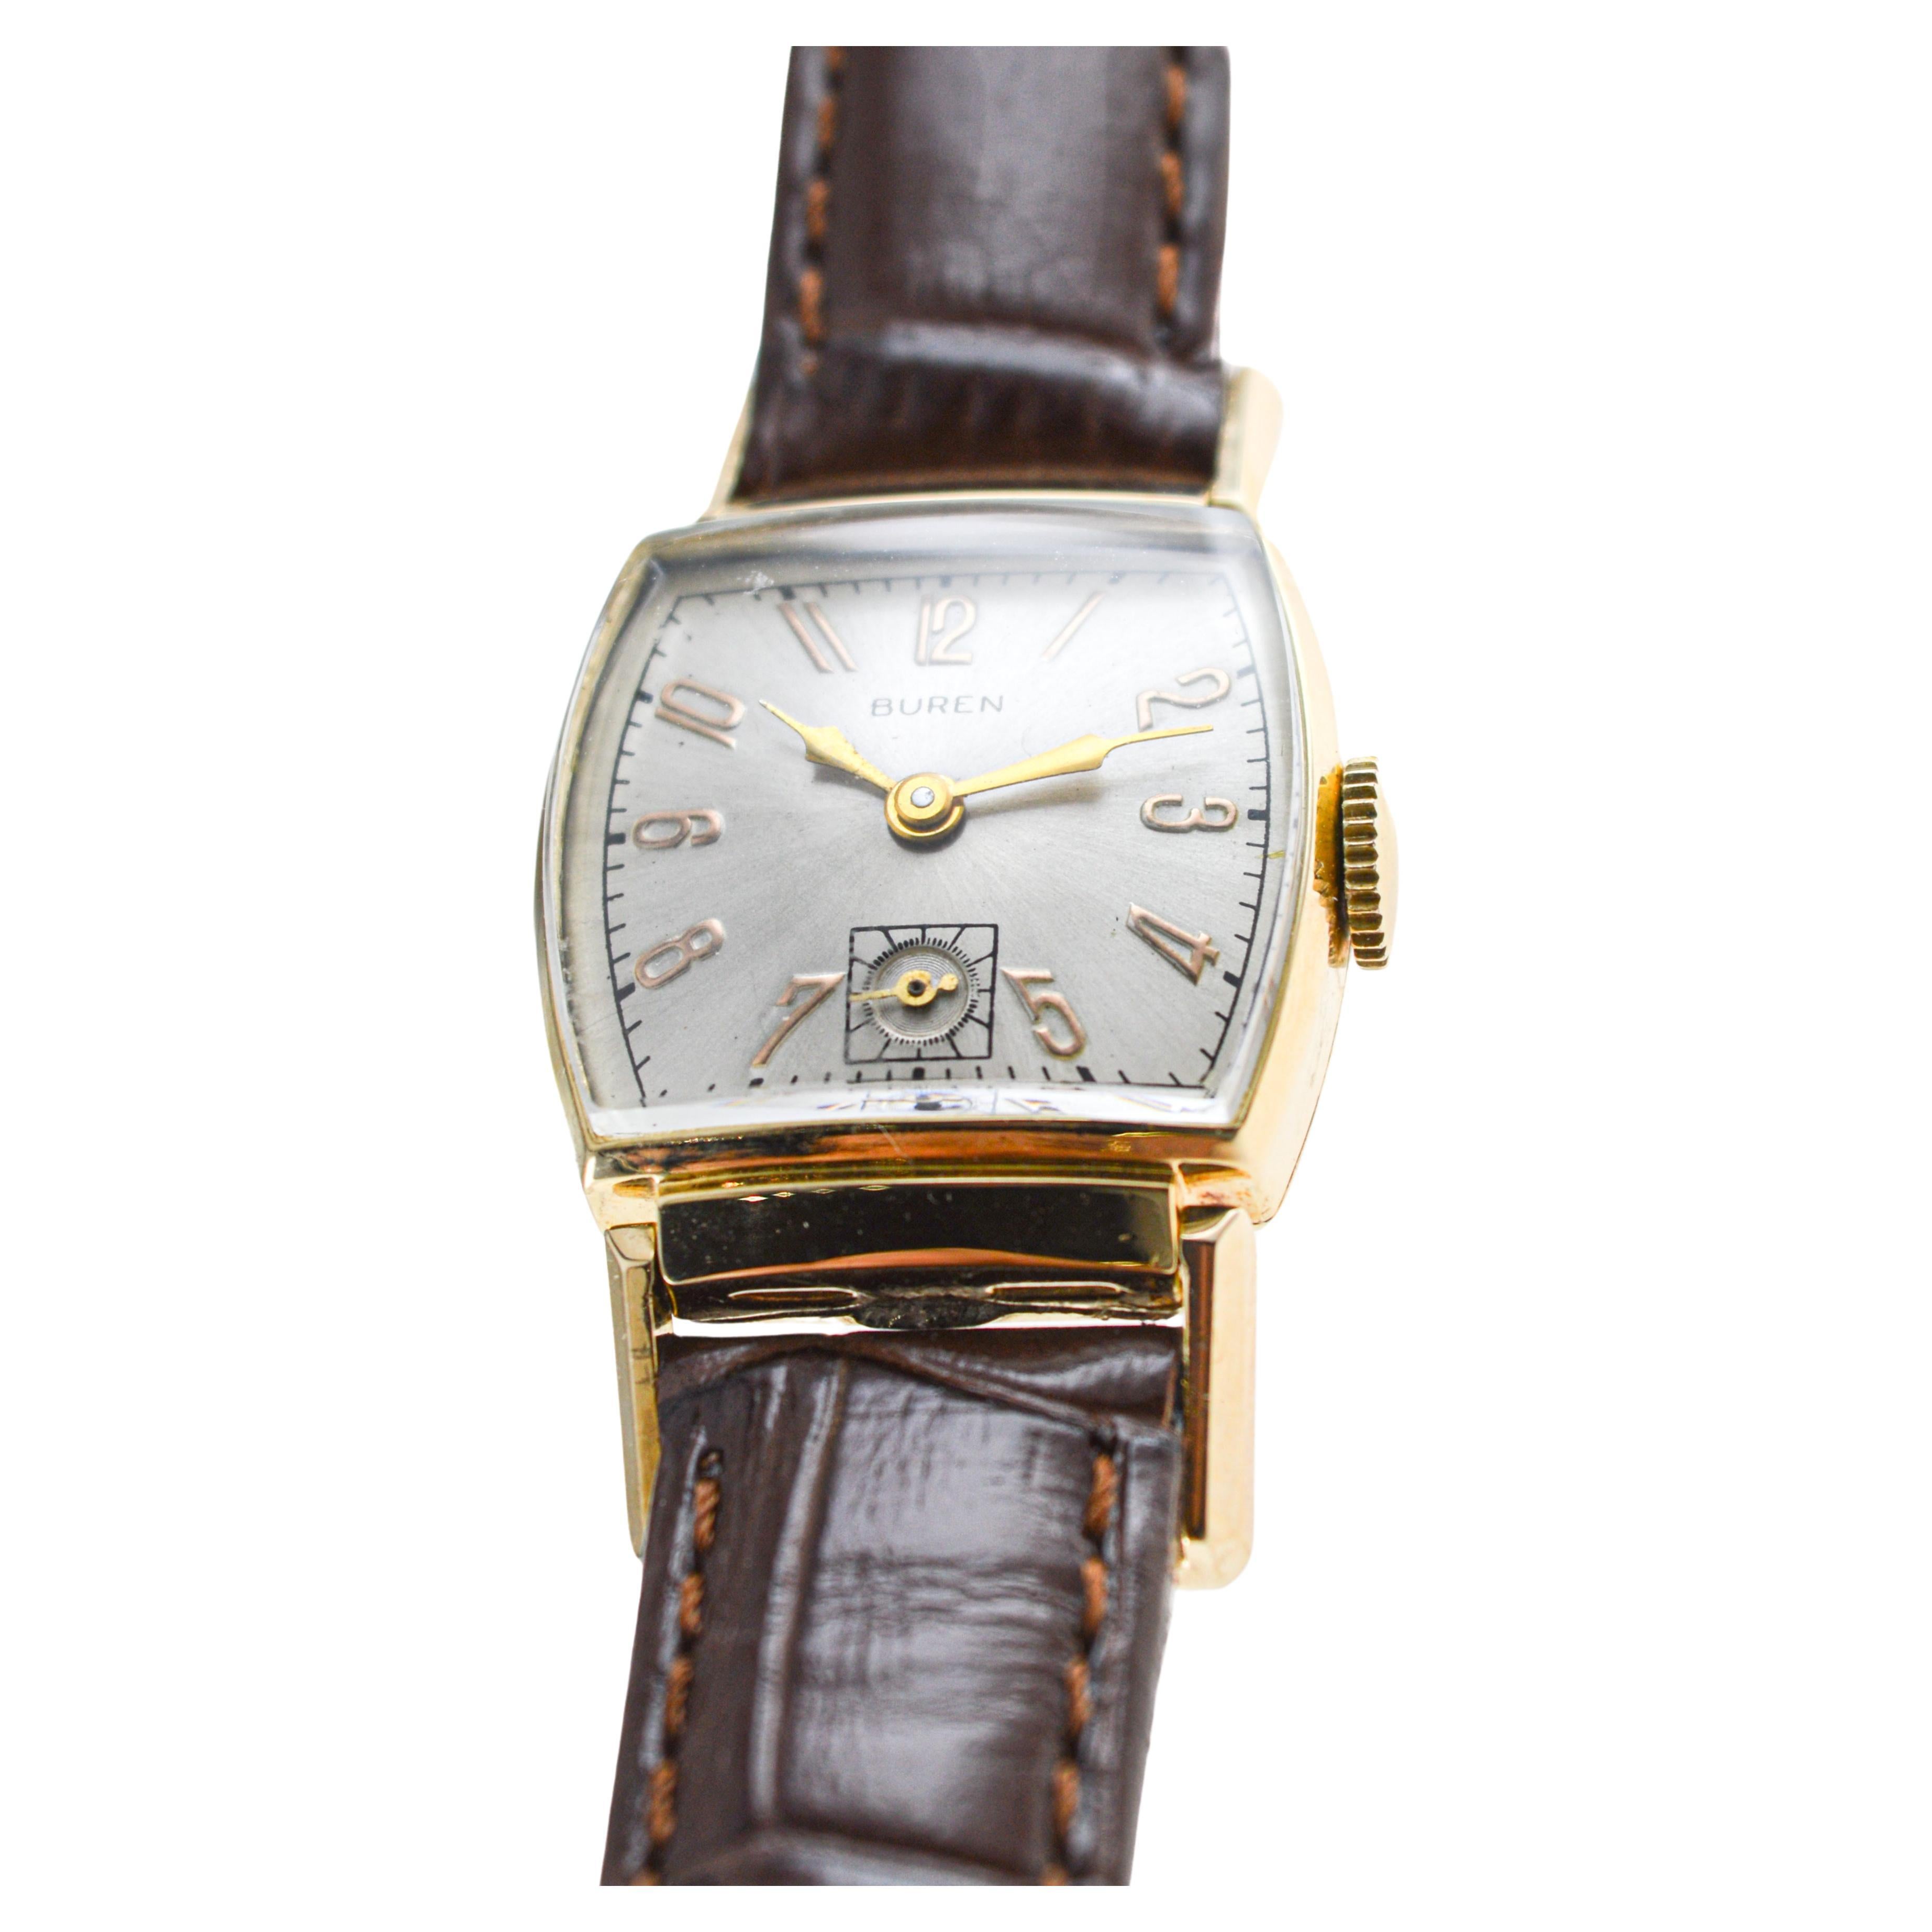 Buren Gold Filled Art Deco Watch with Articulated Lugs From the 1940's In Excellent Condition For Sale In Long Beach, CA